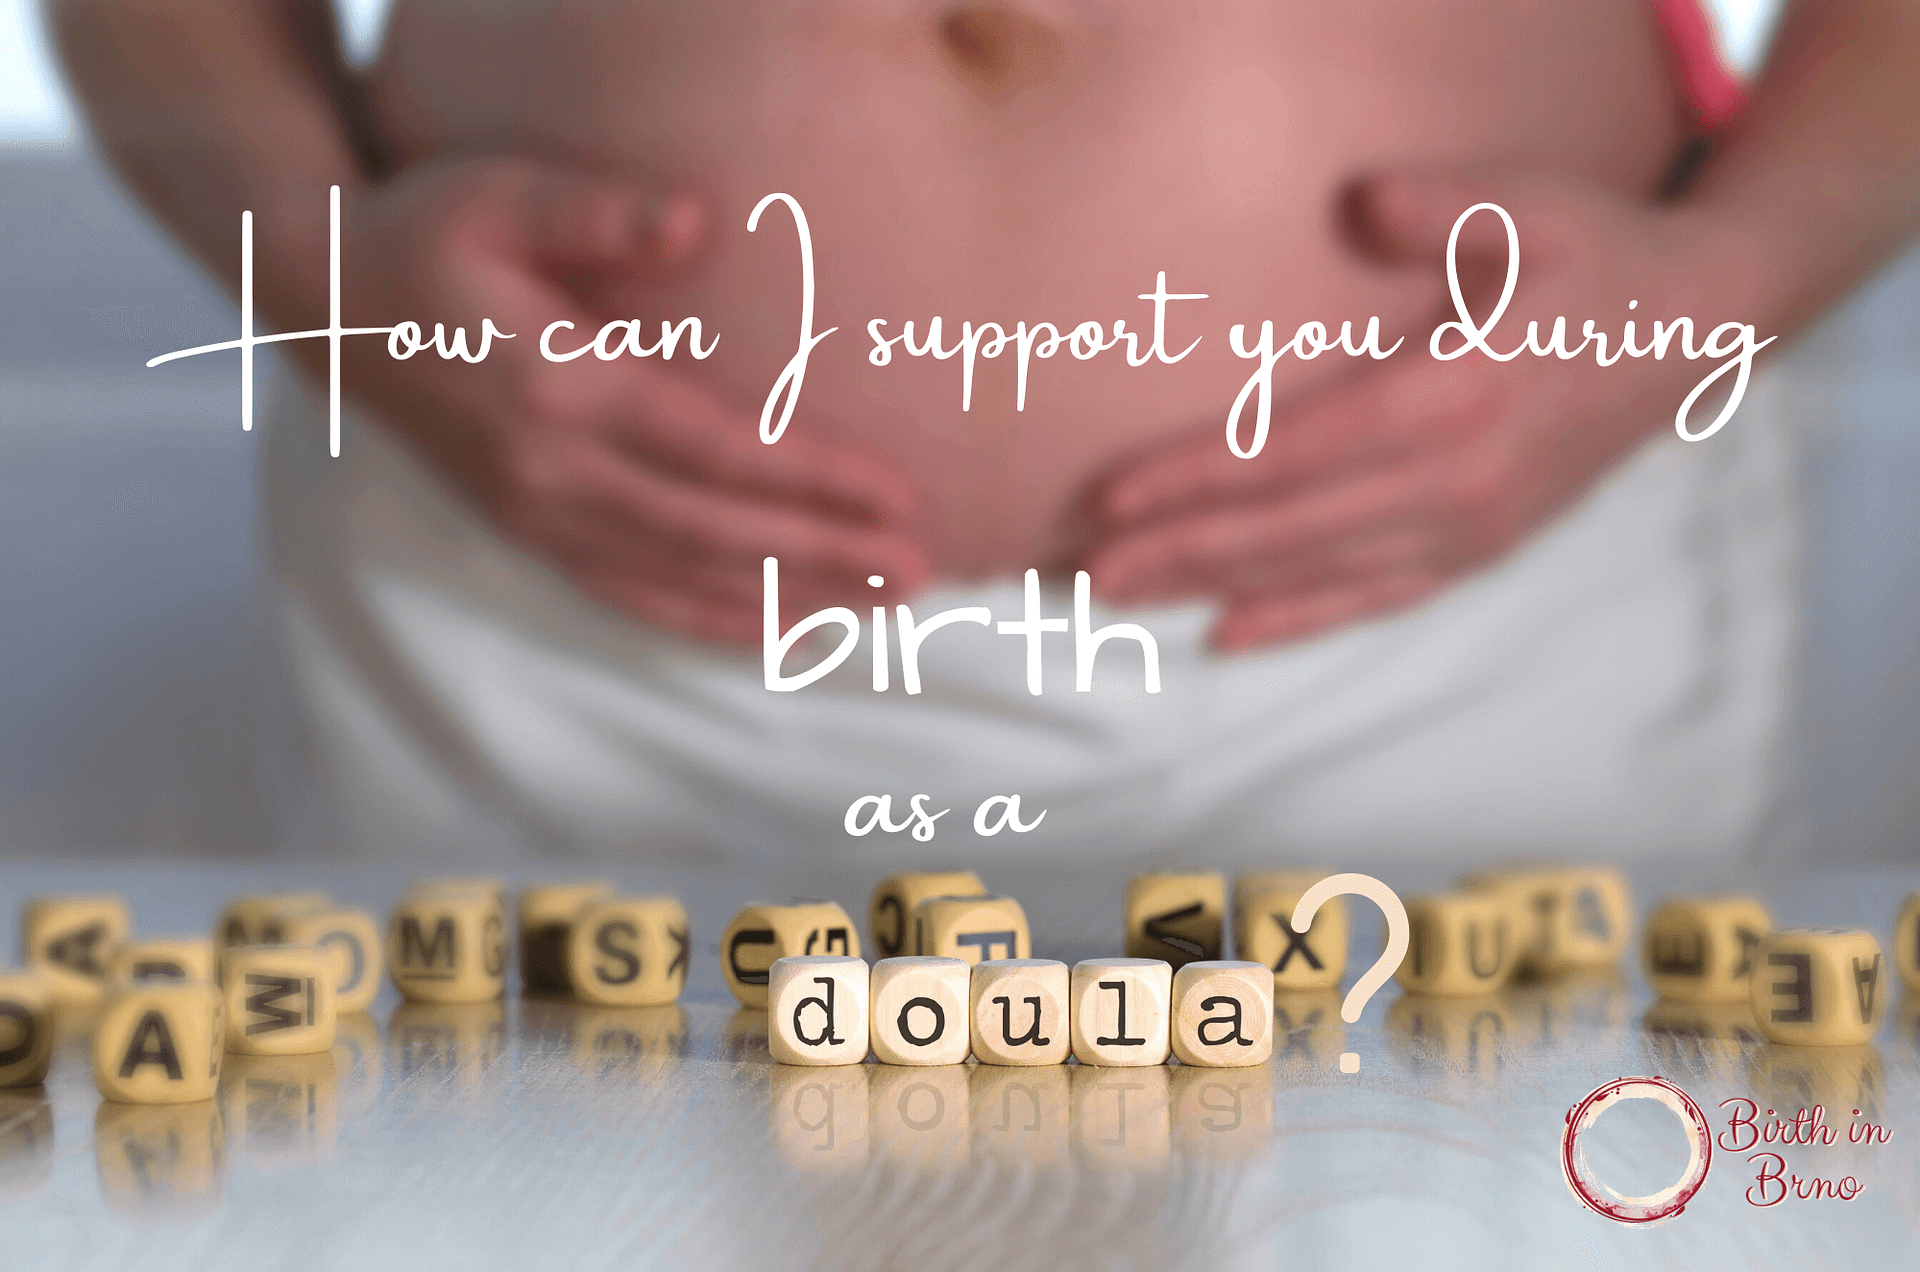 You are currently viewing How can I support you during birth as a doula?